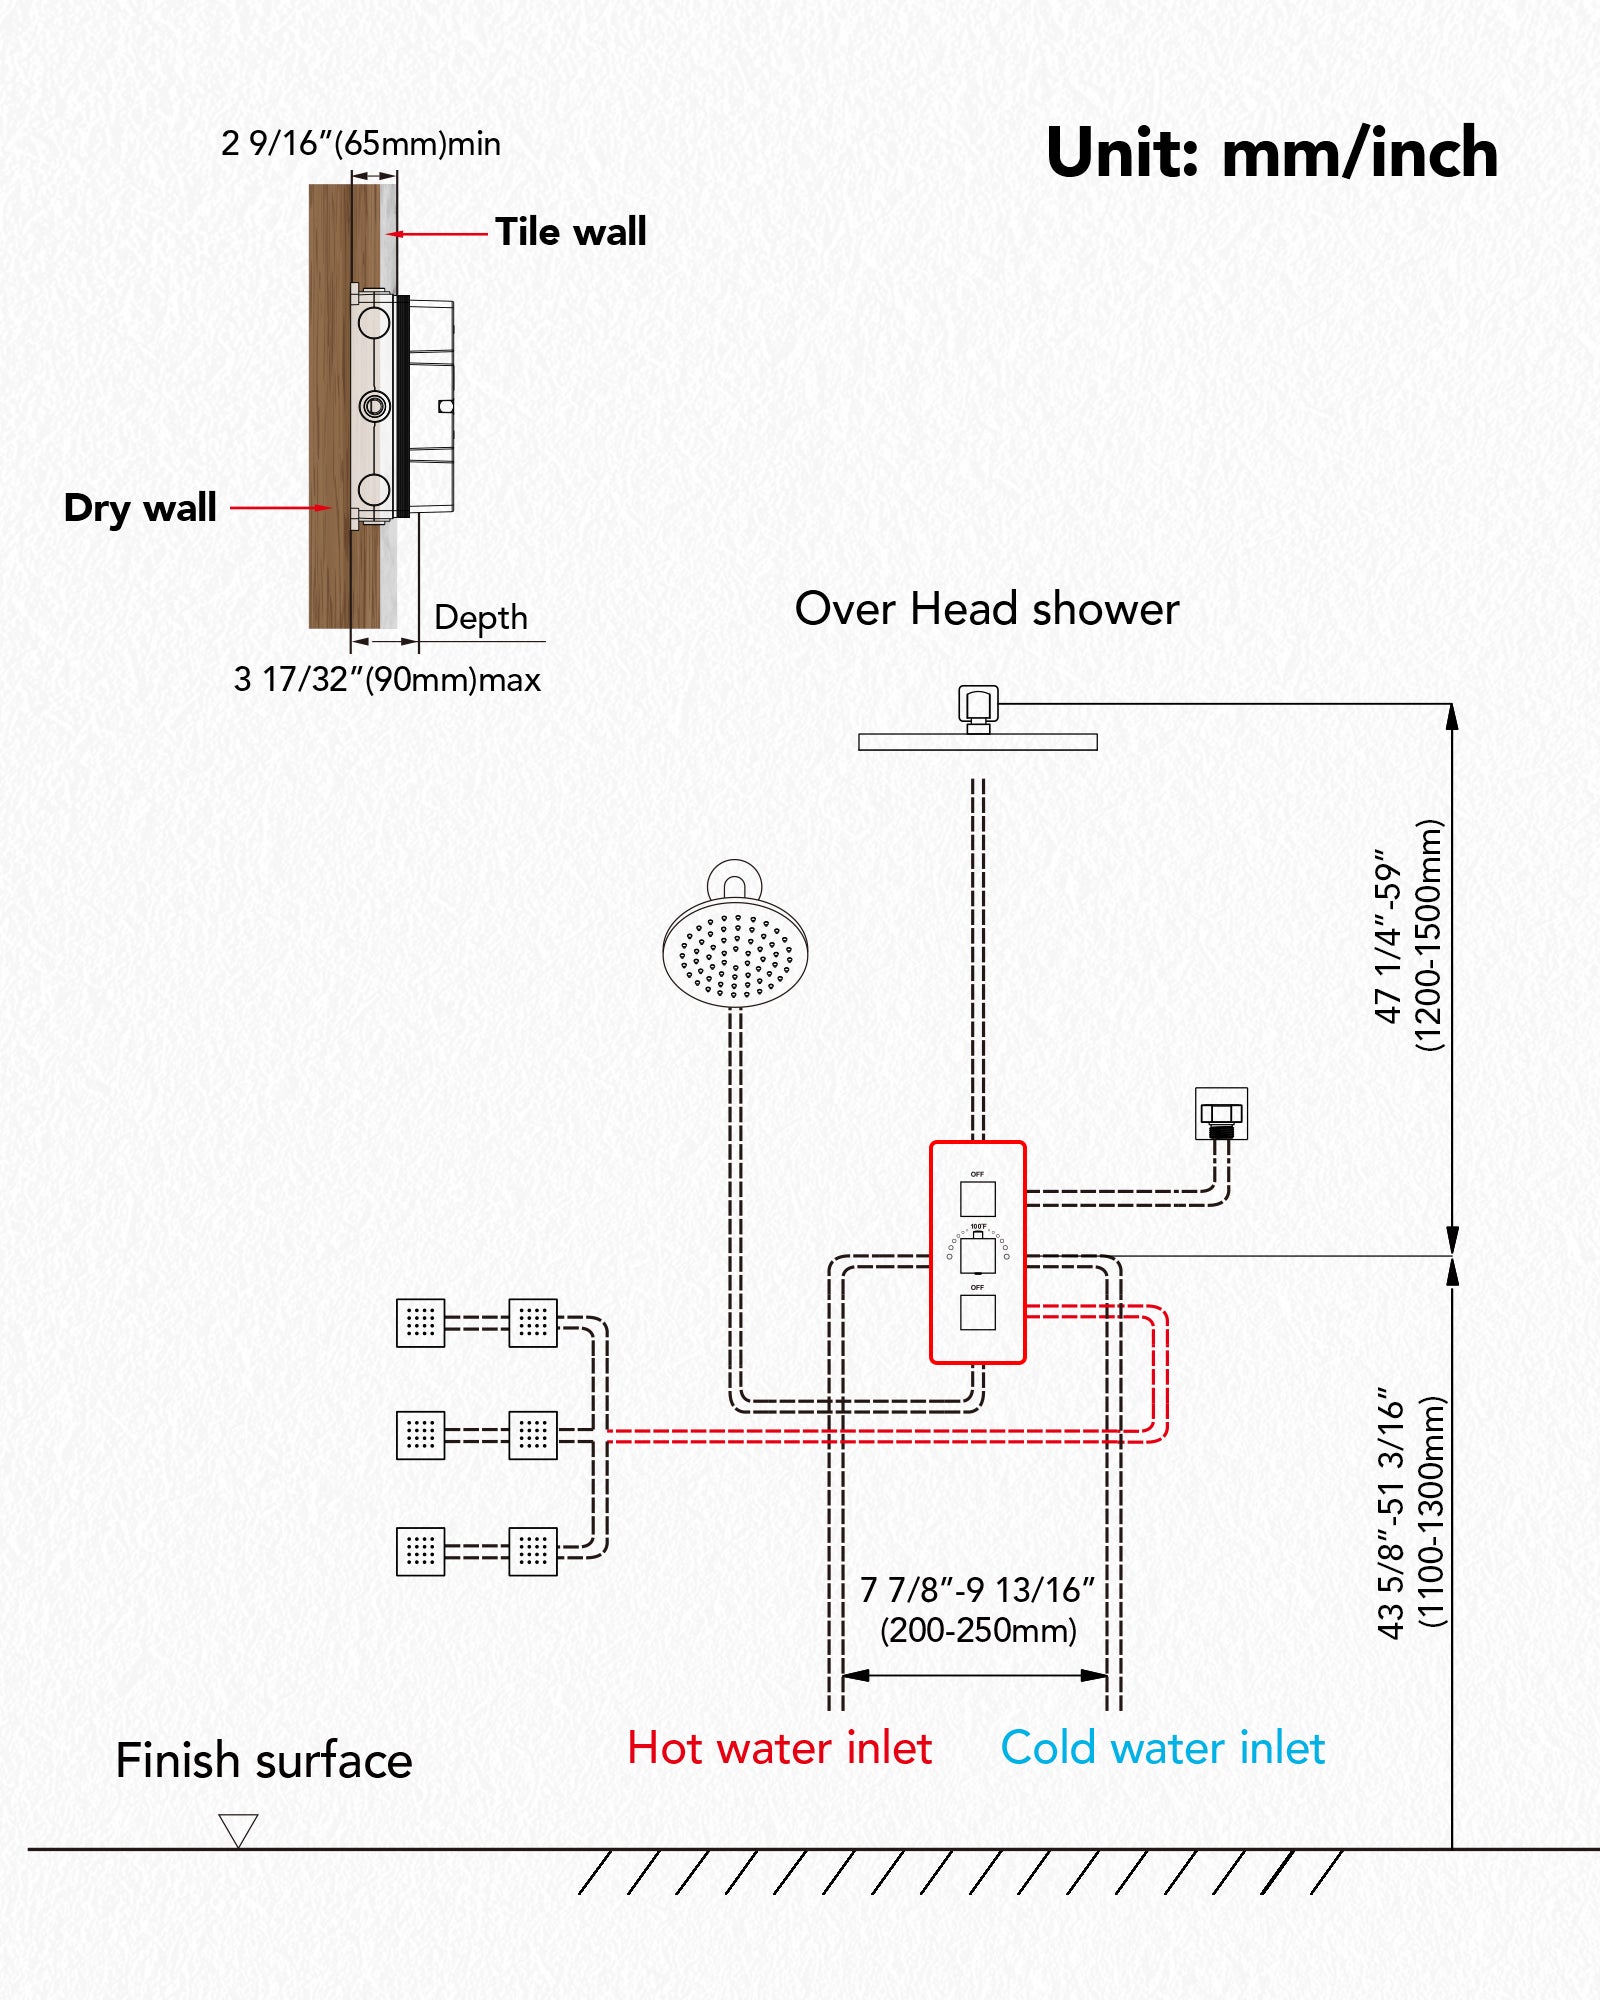 Visual installation instructions for the Everstein SFS-1017 luxury shower faucet system